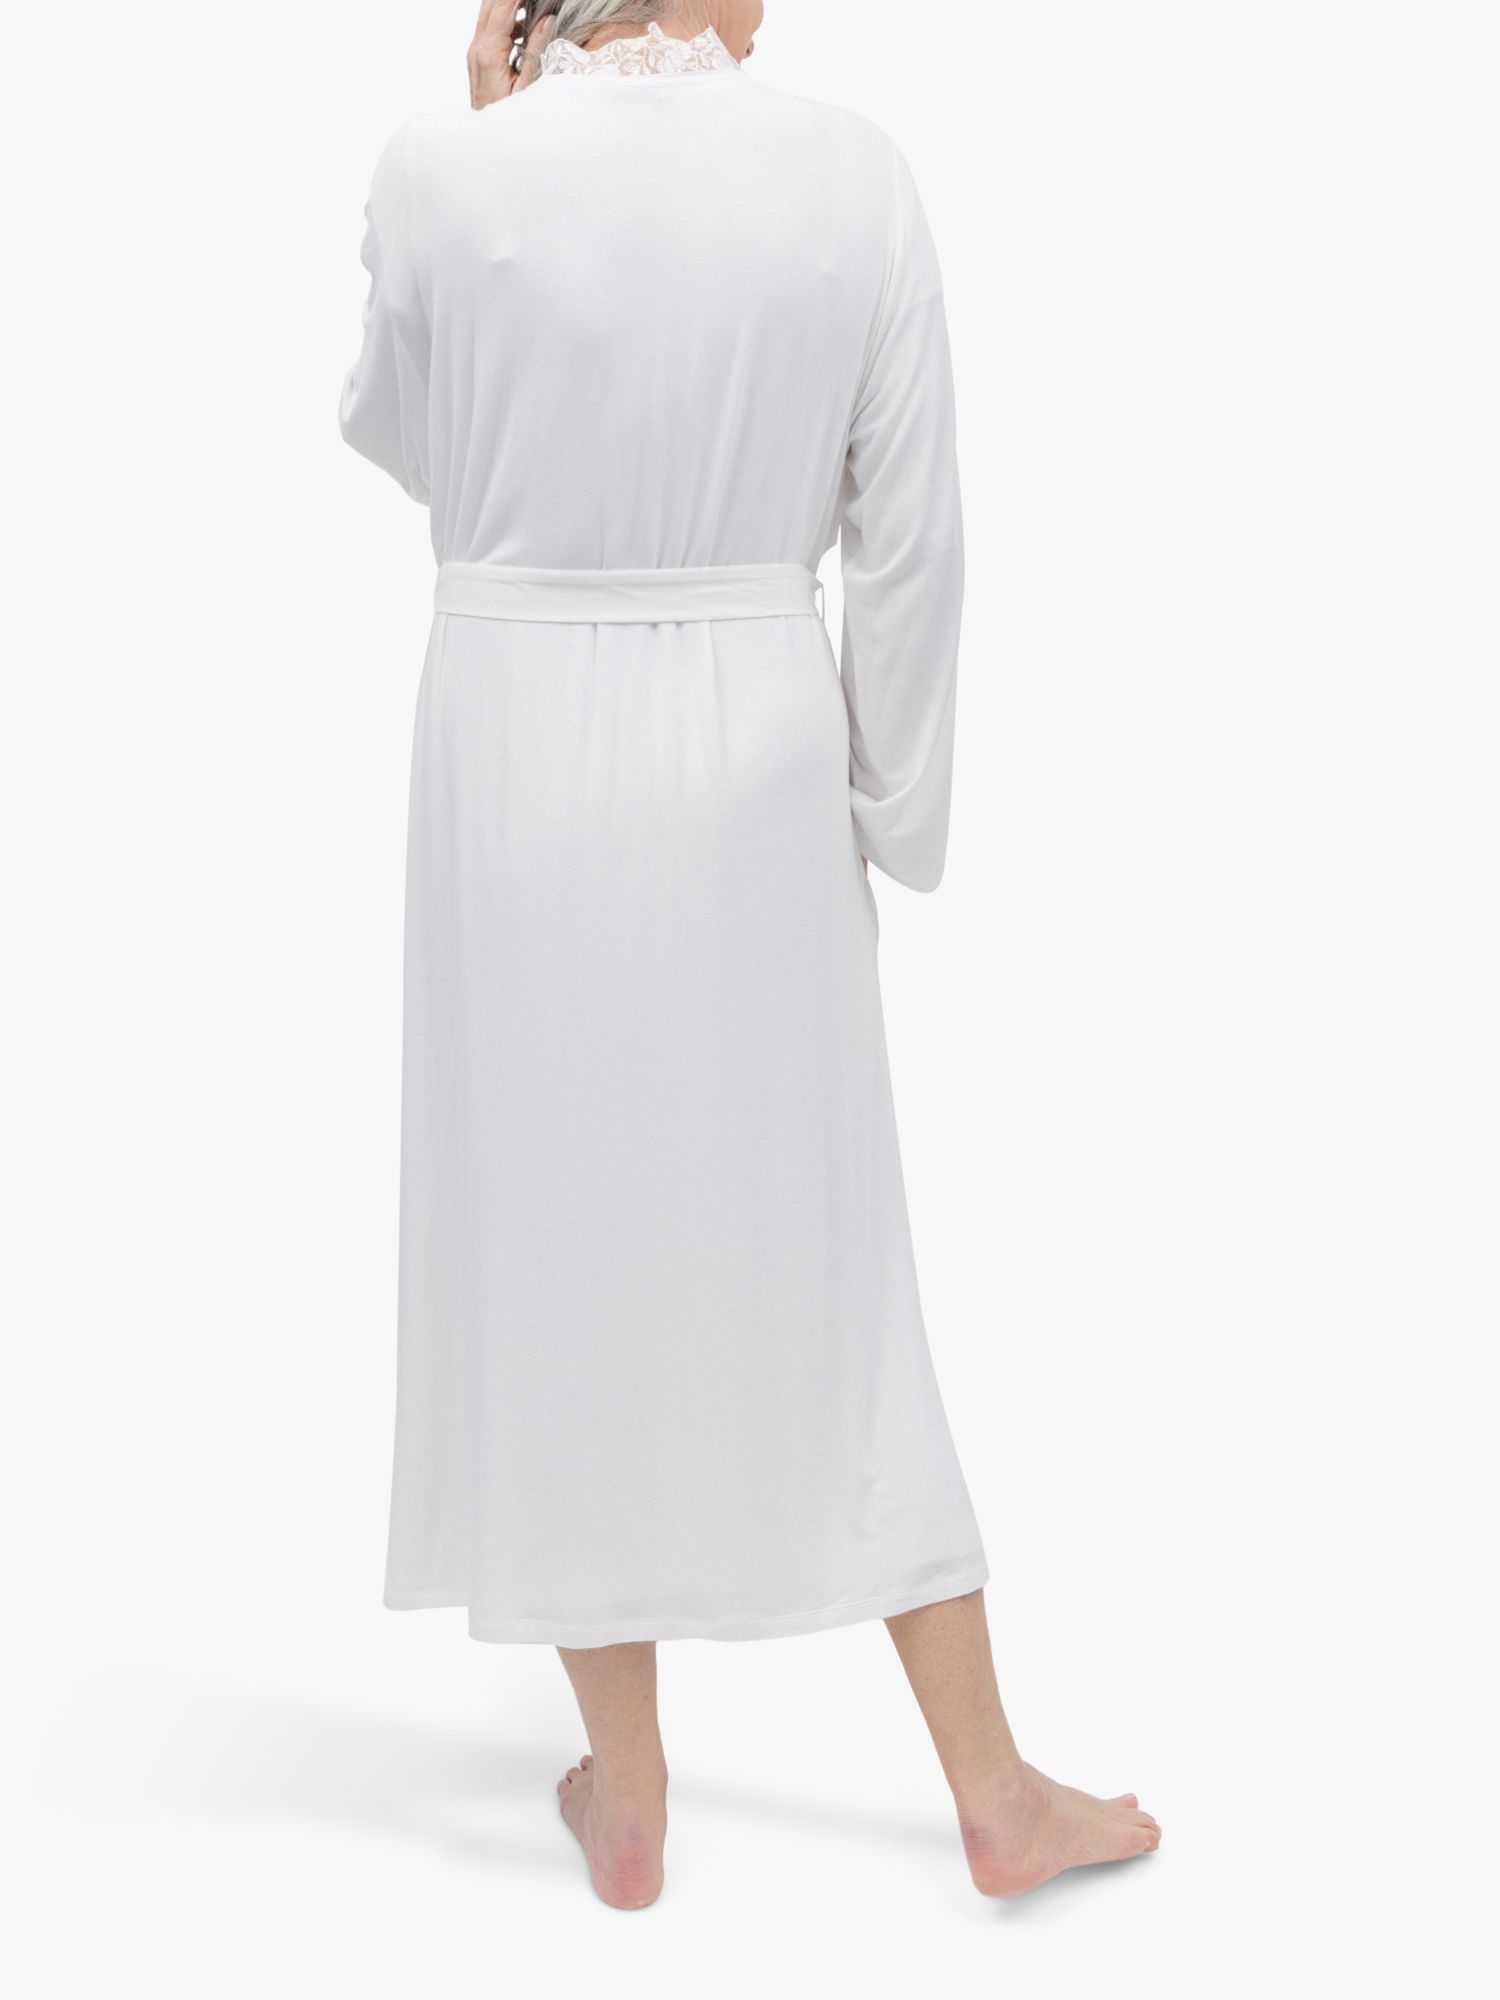 Buy Cyberjammies Evette Lace Trim Dressing Gown, White Online at johnlewis.com